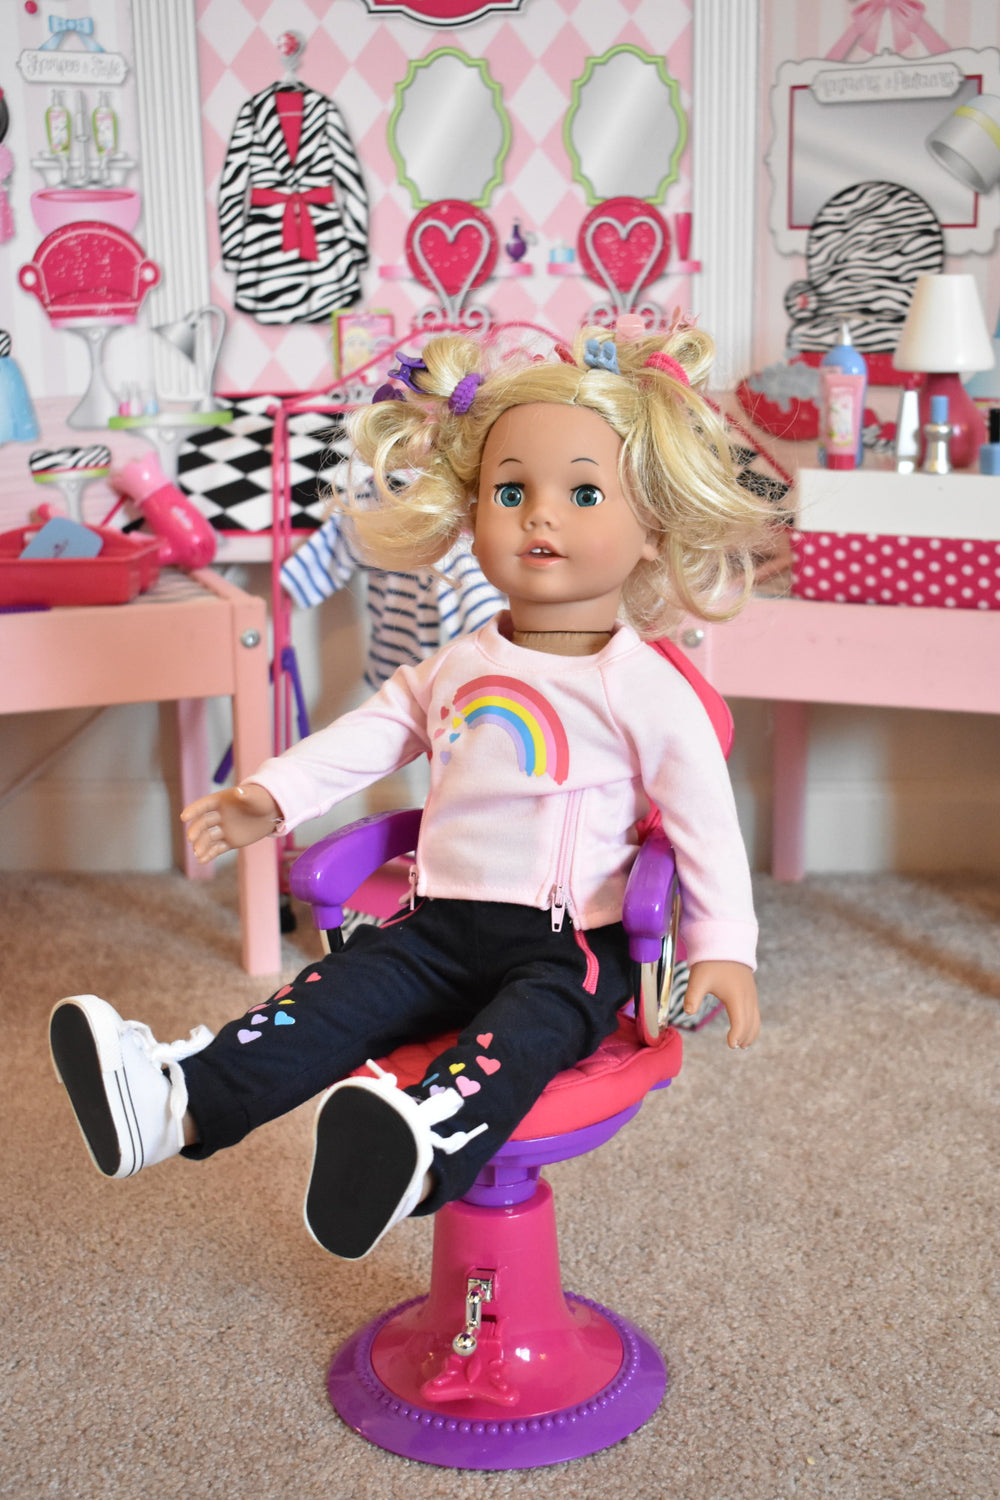 An 18" blonde doll sitting in a salon chair with a salon background behind her.